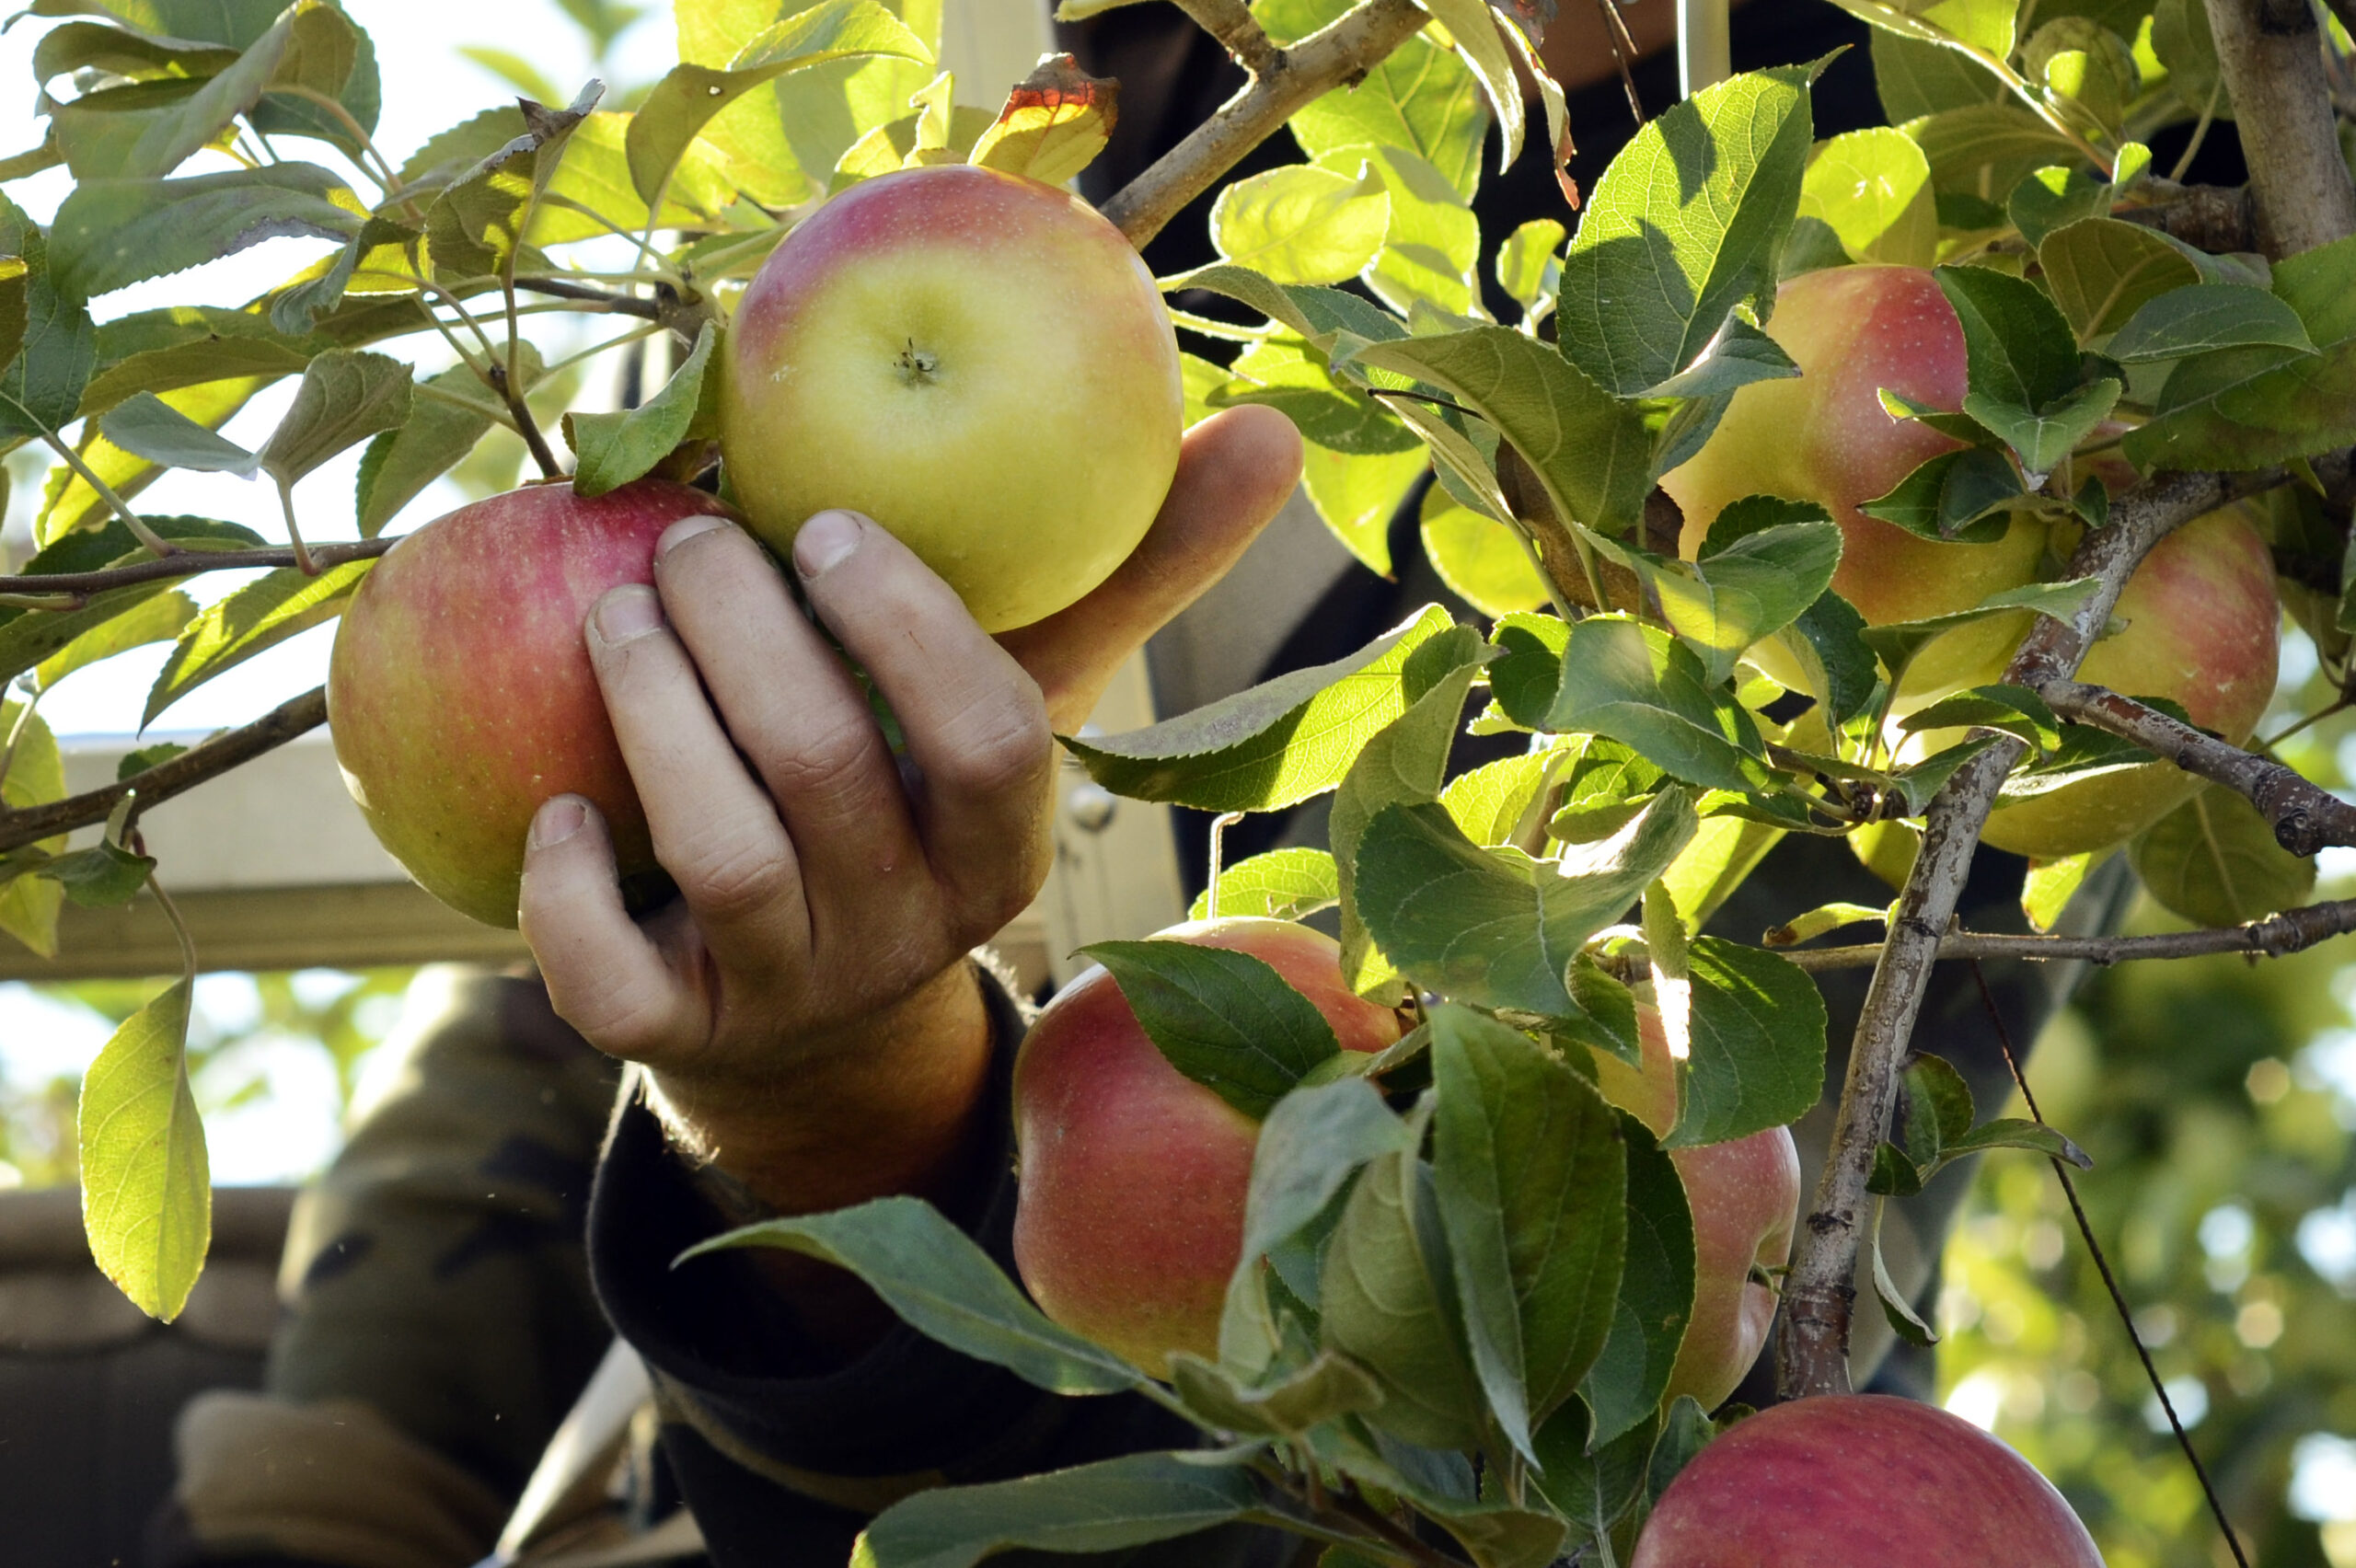 As Harvest Begins, Wisconsin Apple Orchards Hope Customers Return With New COVID-19 Practices